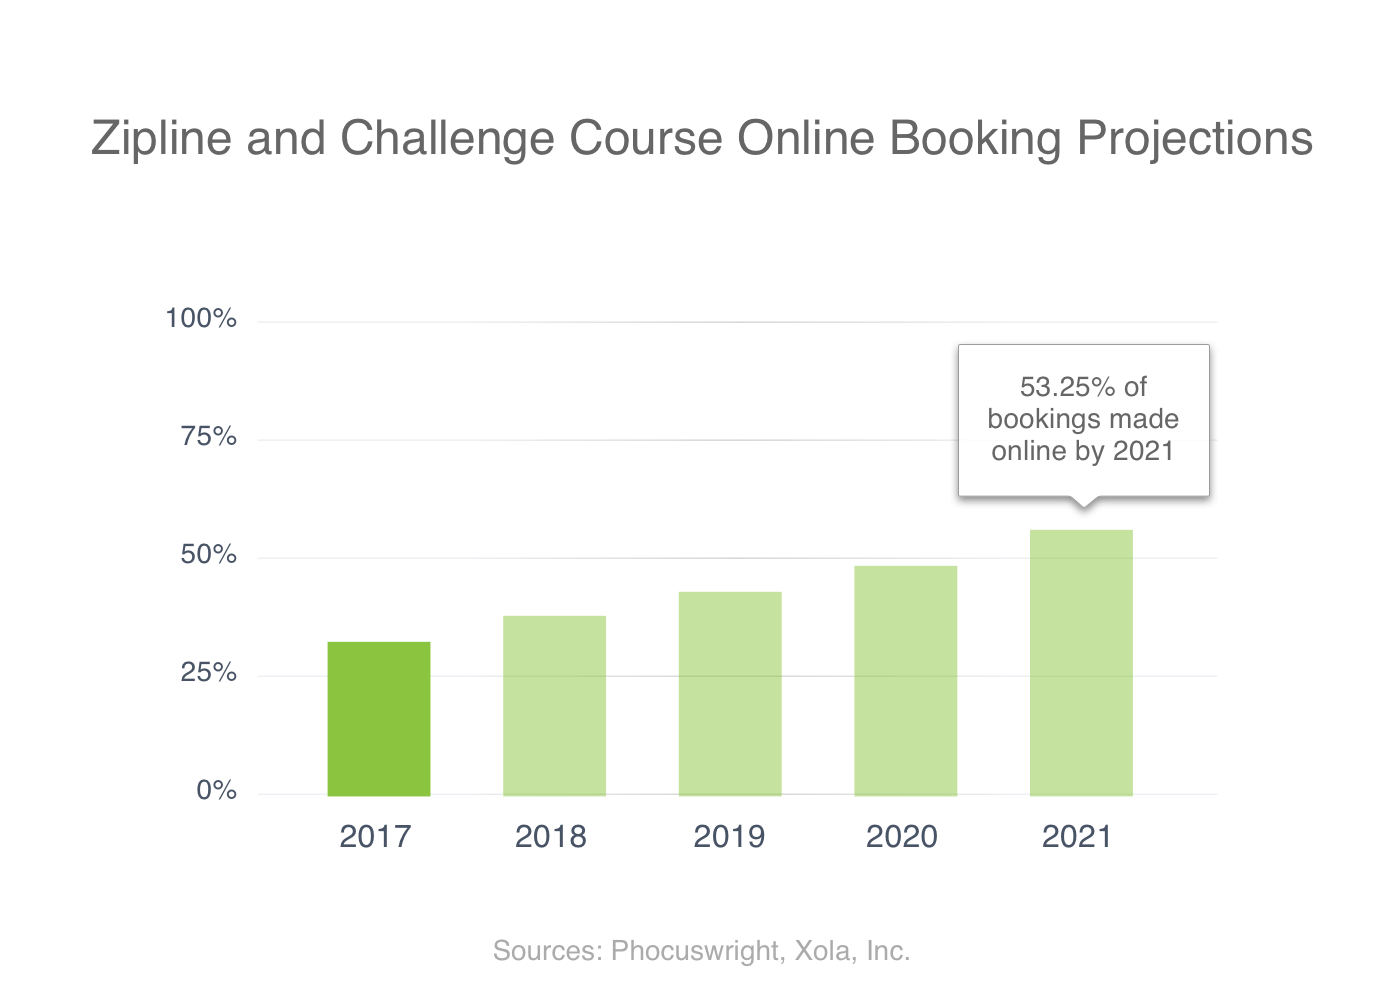 Zipline and Challenge Course Online Booking Projections Xola Phocuswright 2017